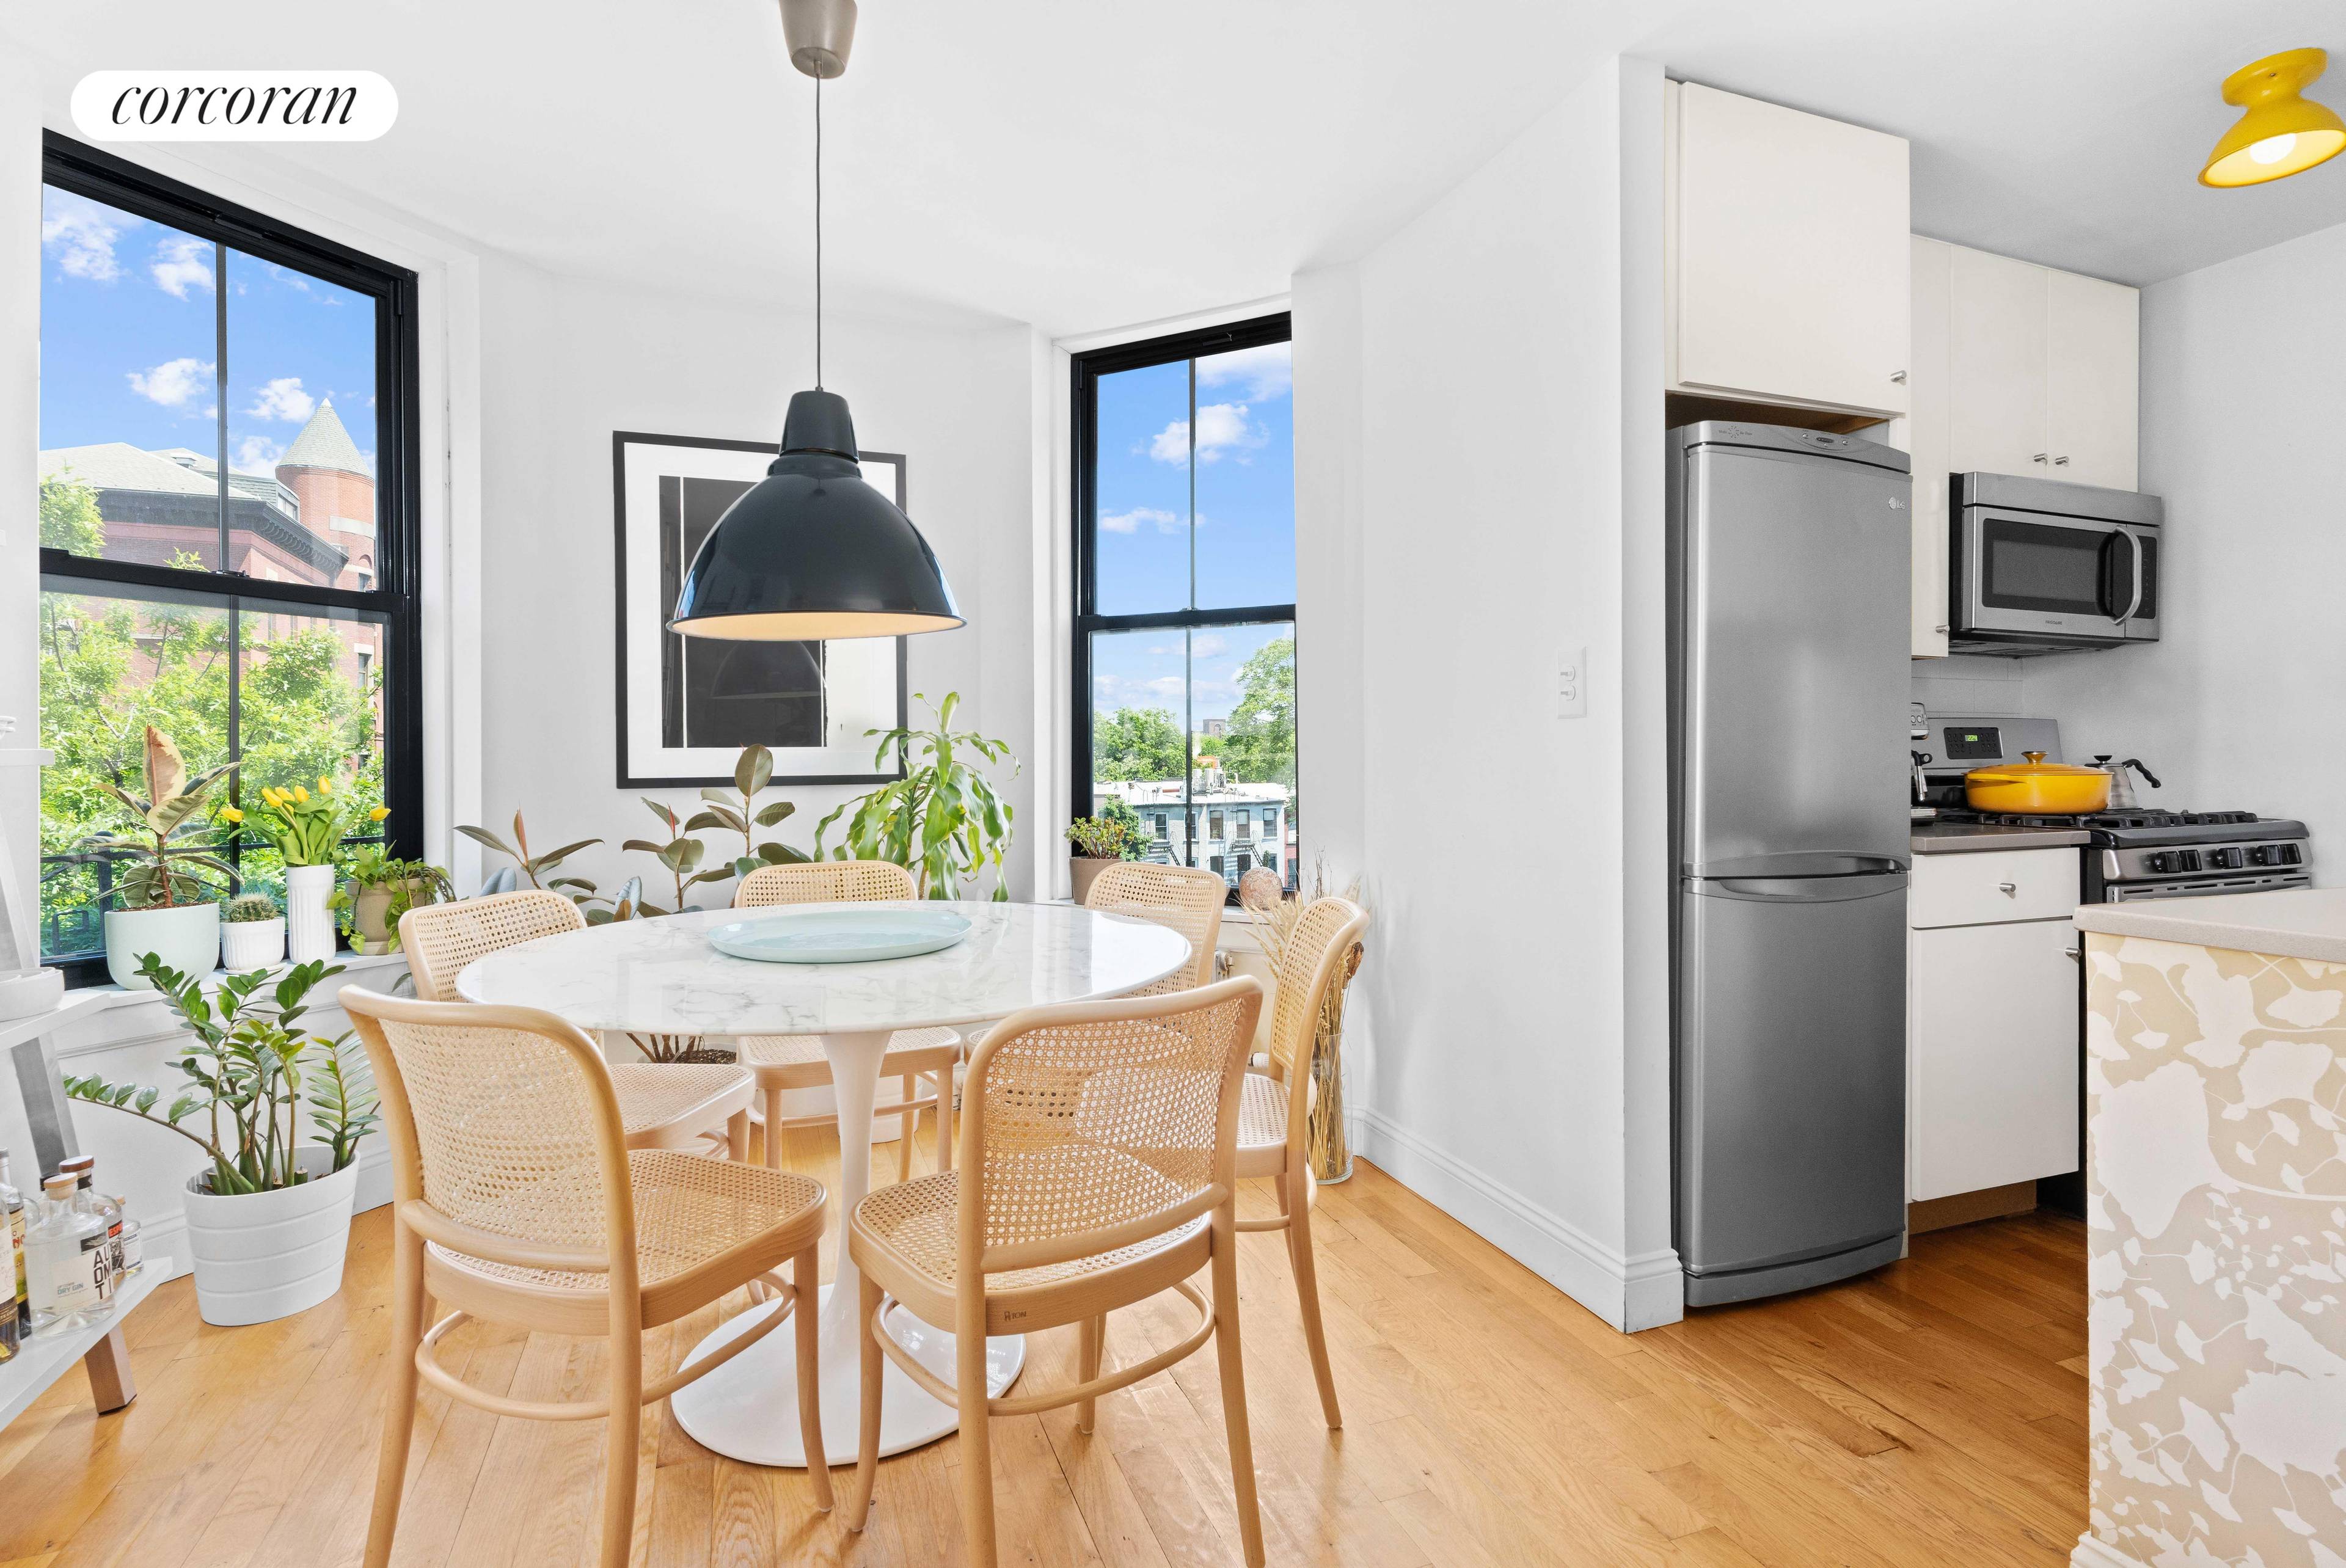 Located in historic Cobble Hill Towers, 140 Warren Street, Apartment 6D is a beautifully renovated and sunny corner two bedroom condominium with a gracious living room, separate dining area and ...